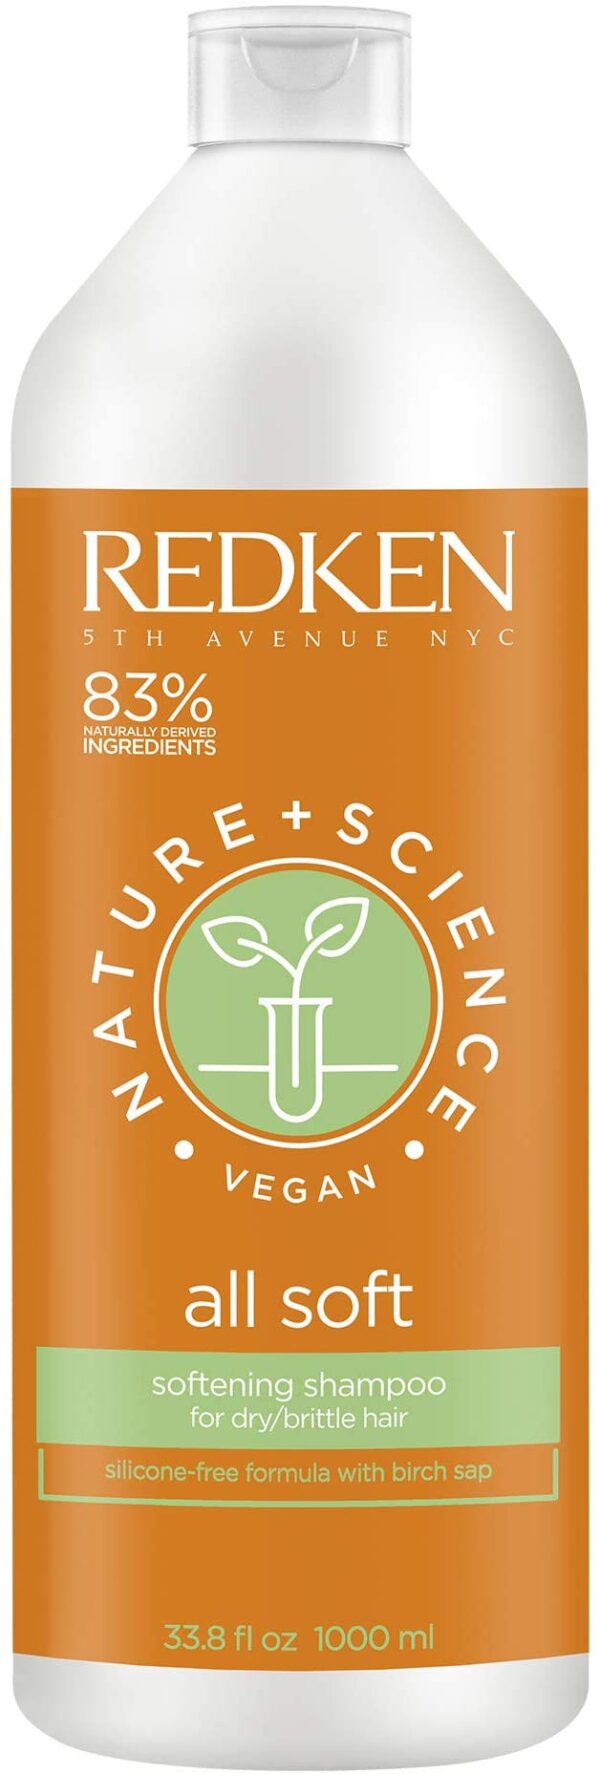 Redken Nature Science All Soft Shampoo 1000ml